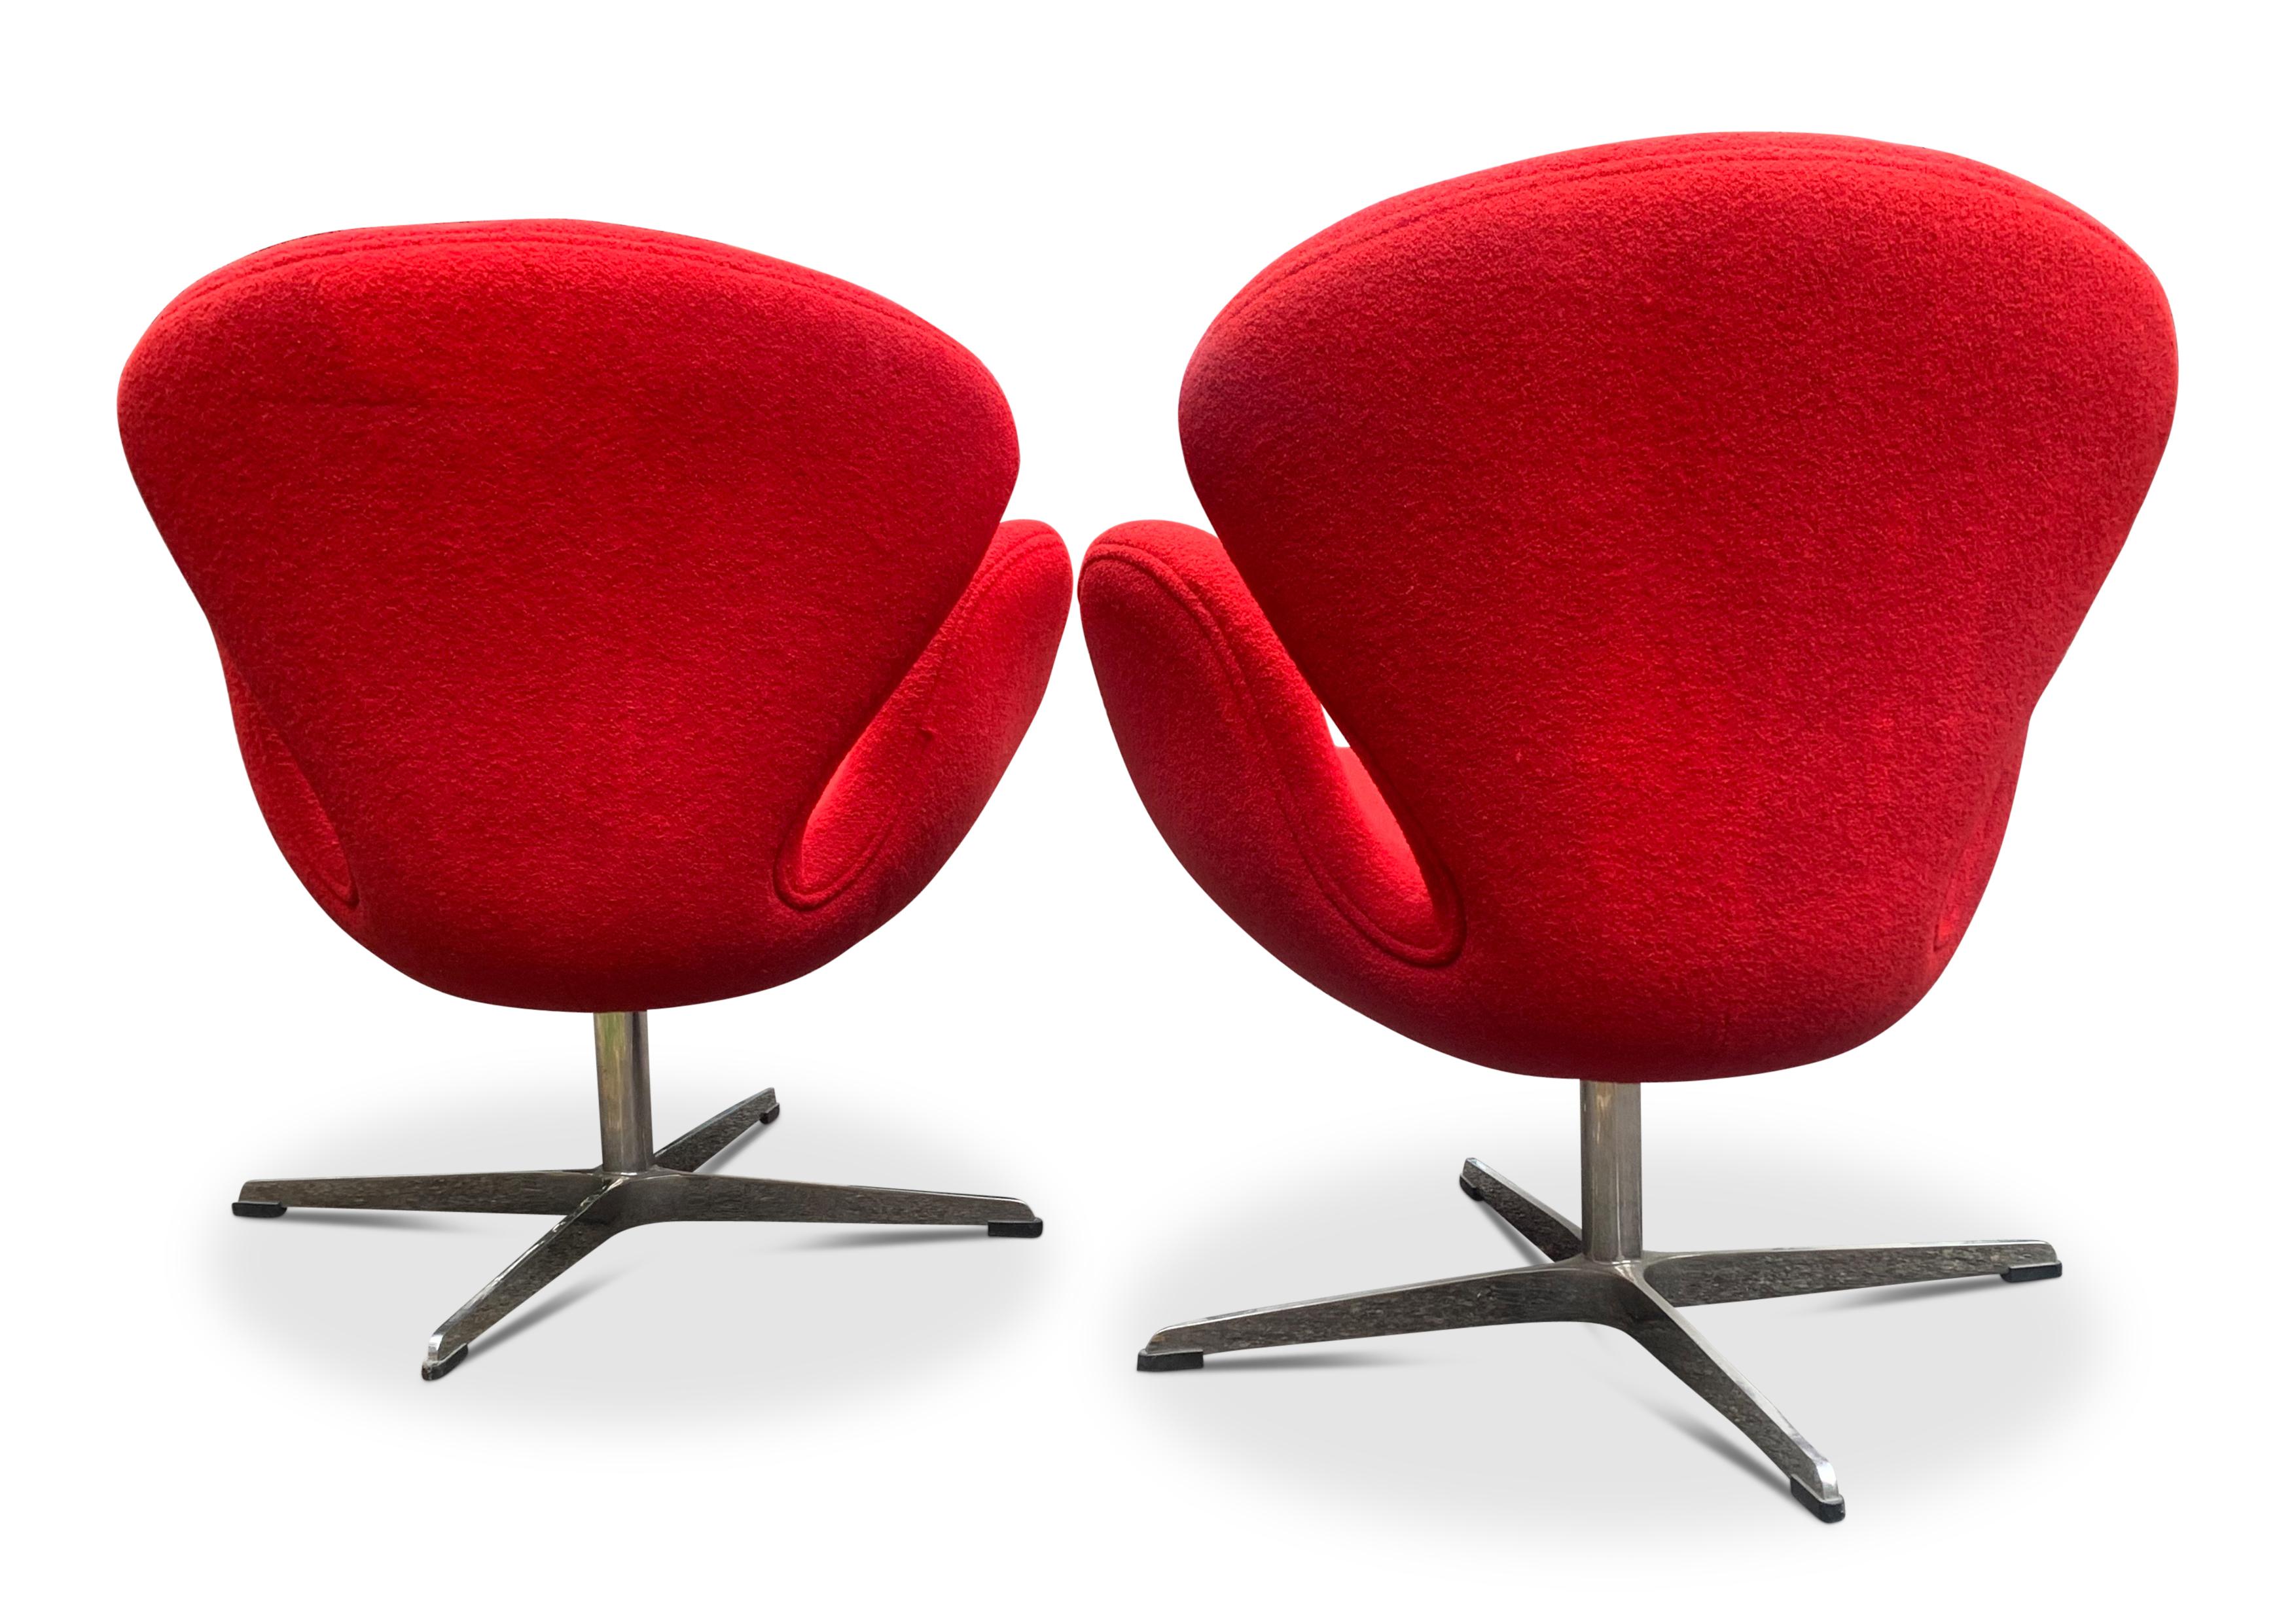 Pair of Vintage Mid Century Modern Style Swan Chairs after Arne Jacobsen In Good Condition For Sale In High Wycombe, GB